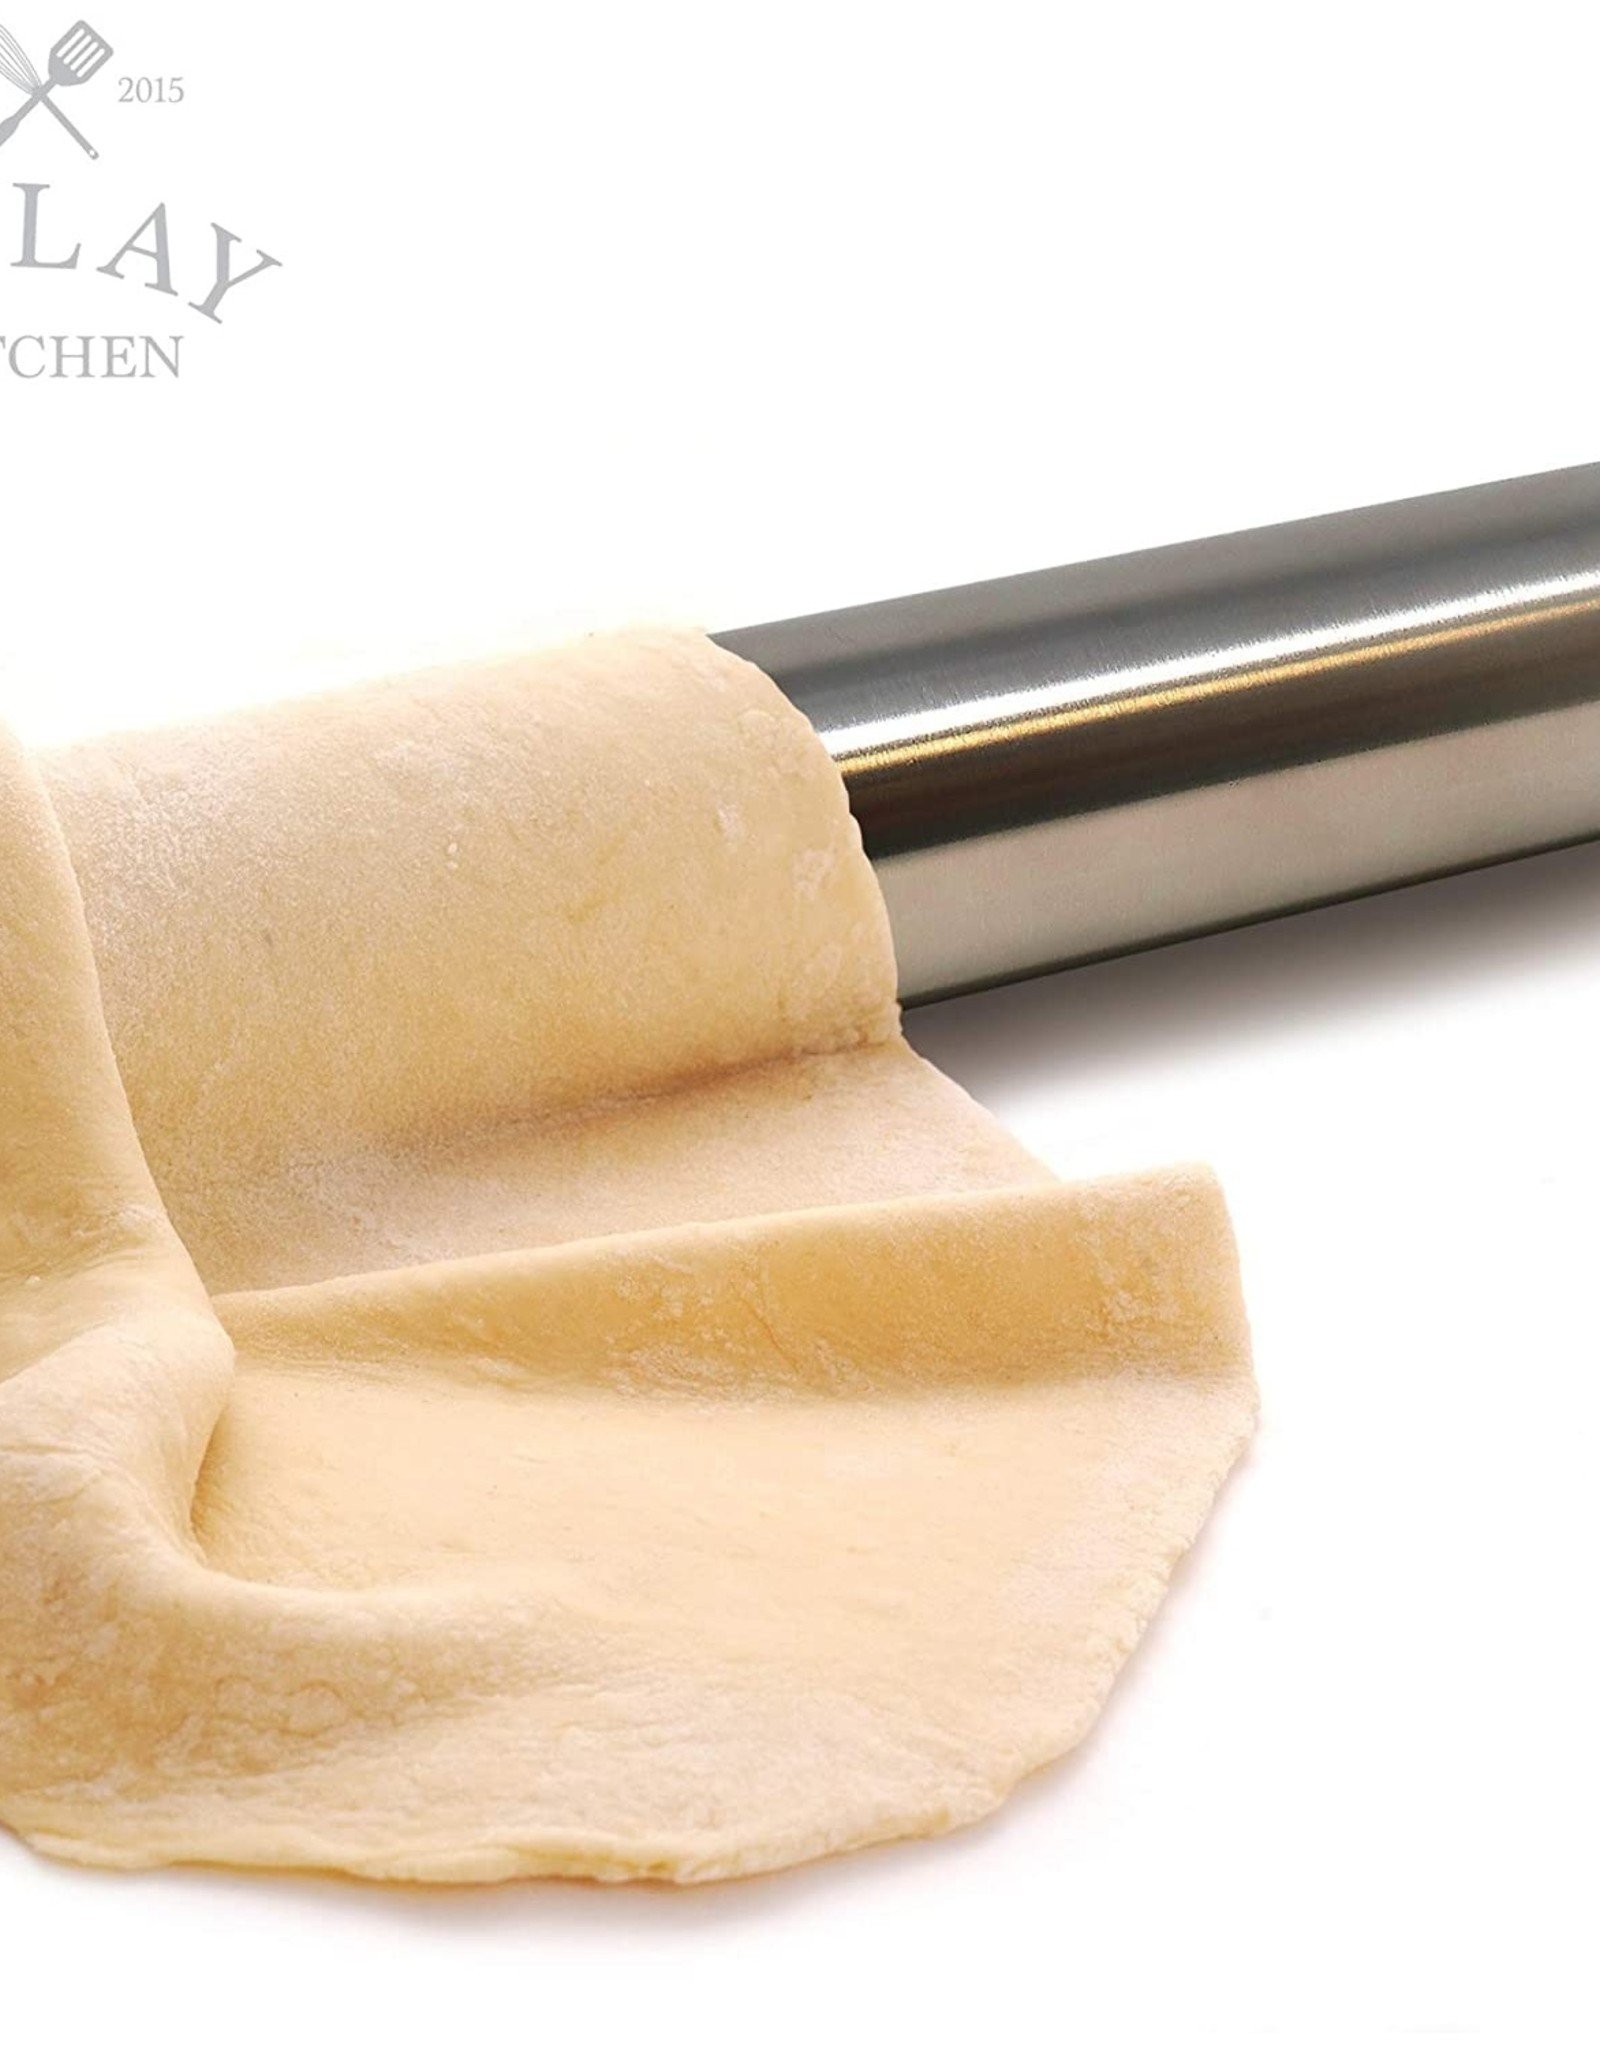 Zulay Kitchen Stainless Steel Rolling Pin 16"